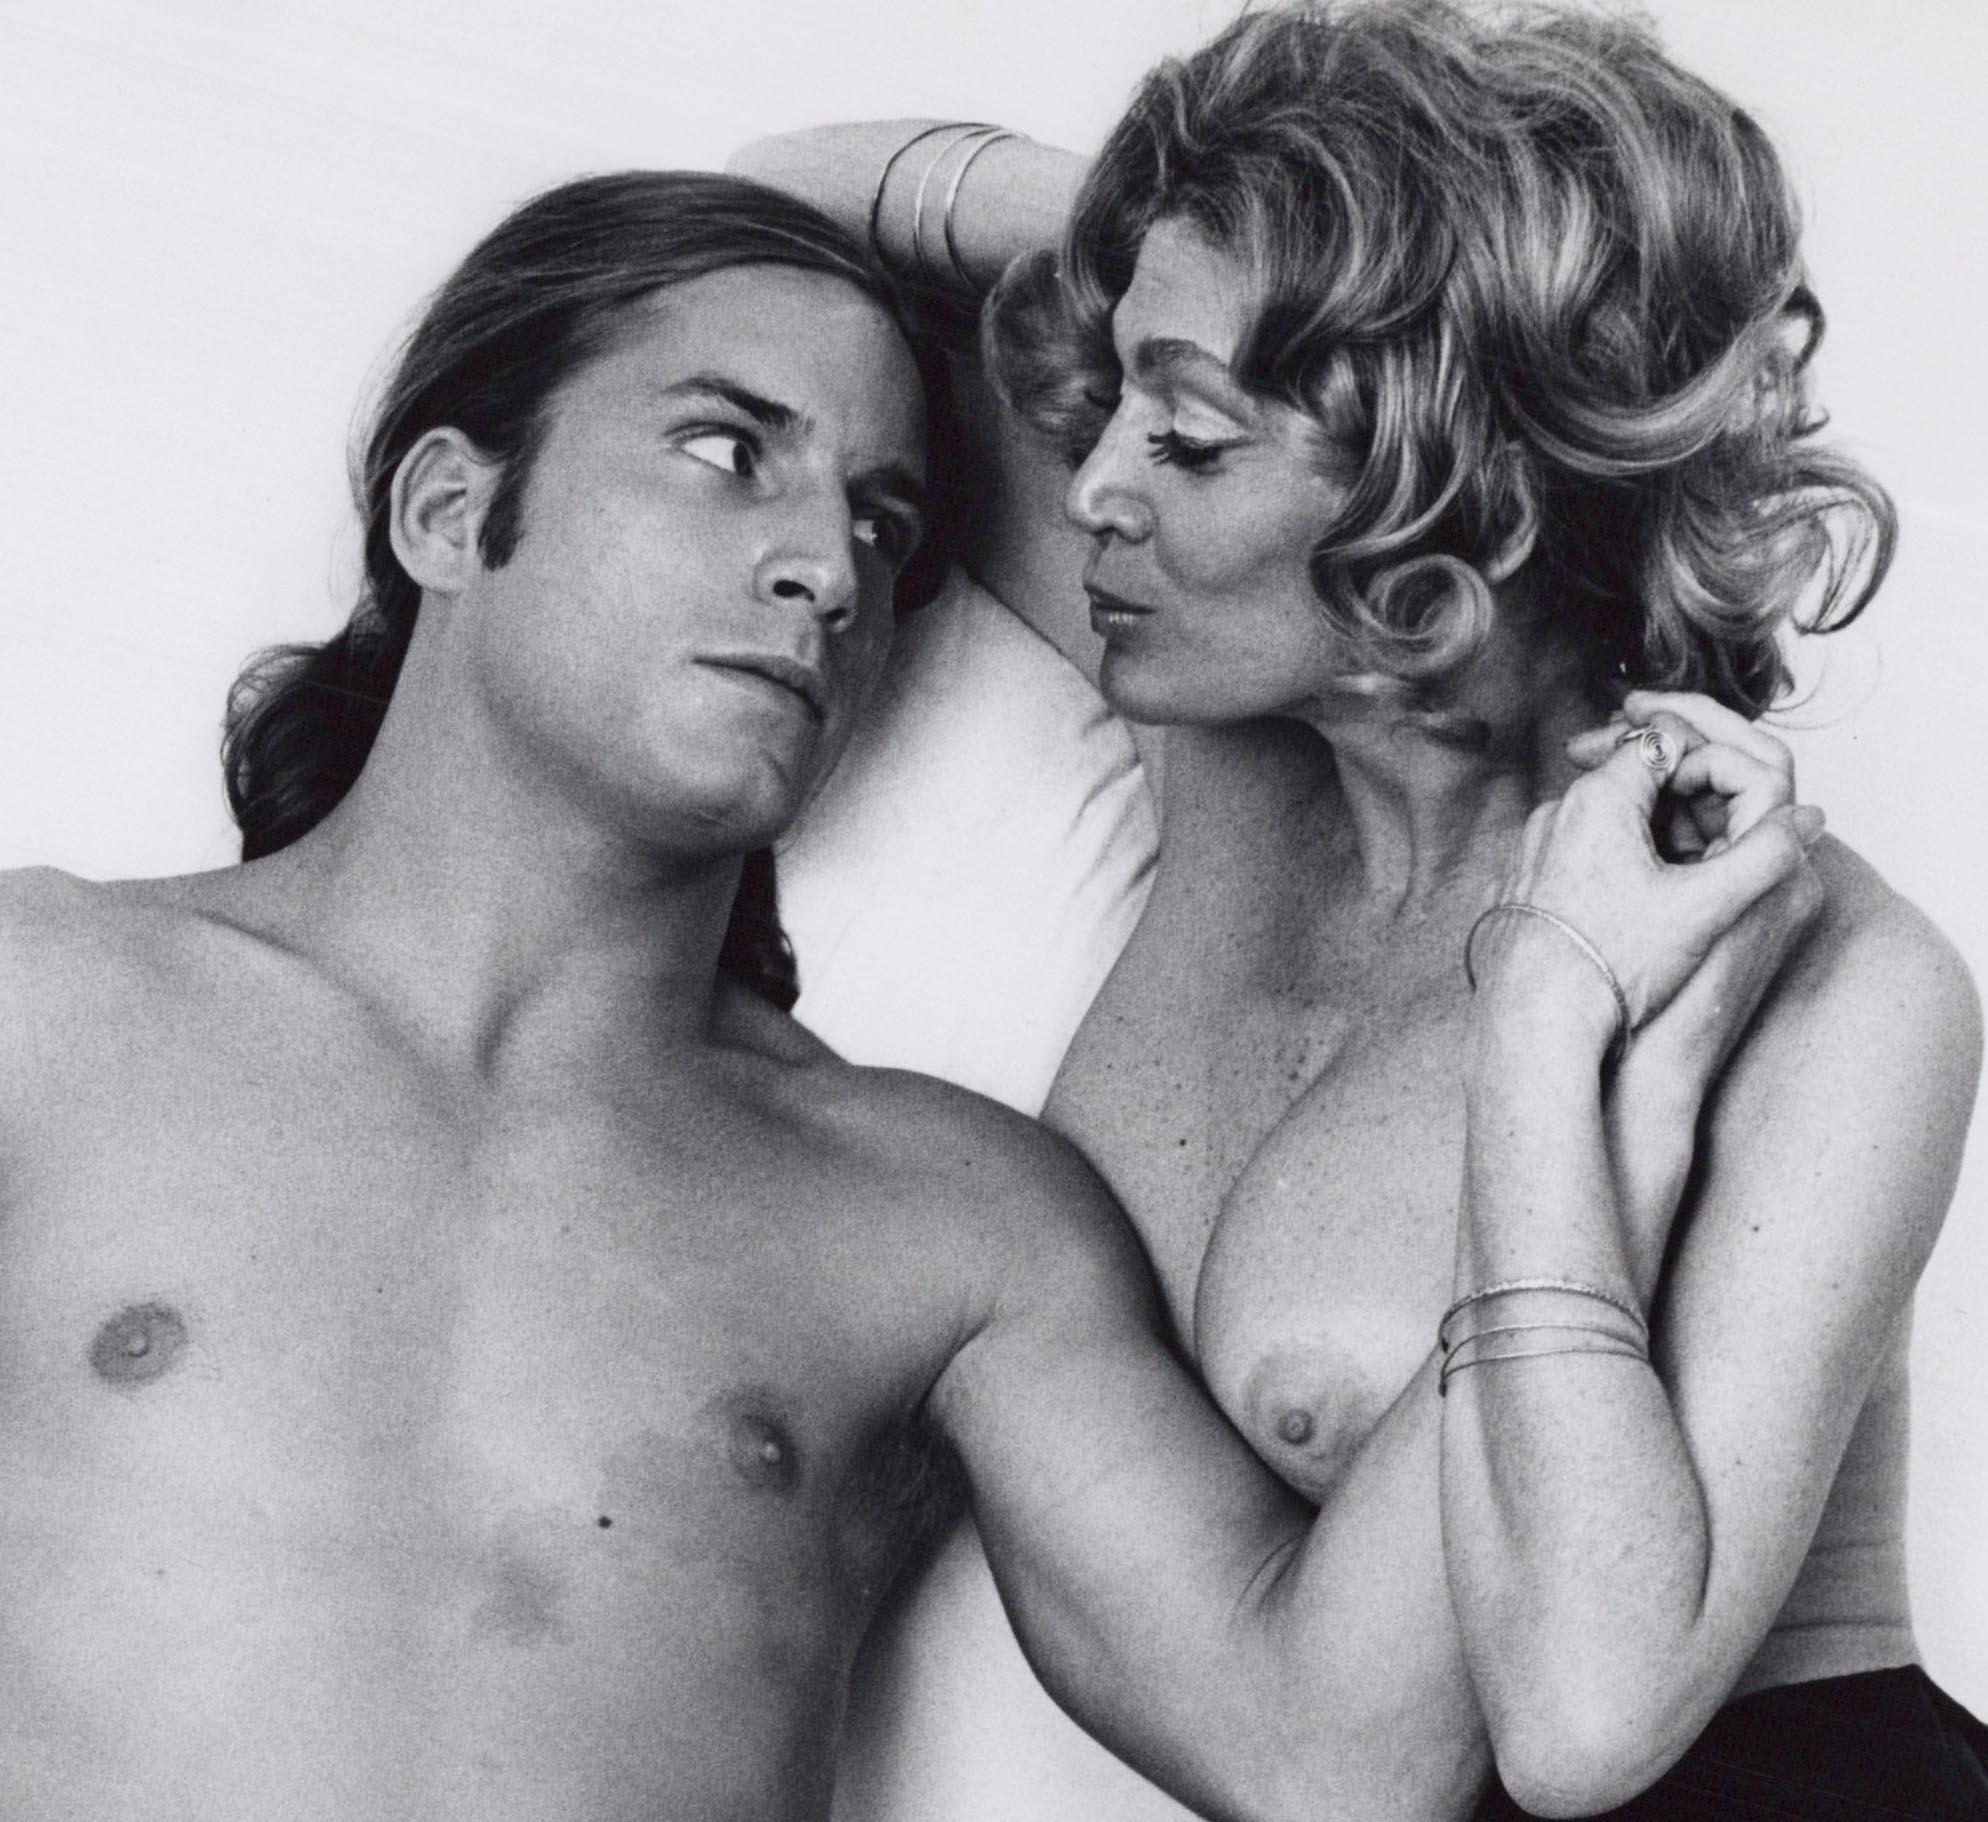 Andy Warhol superstars Joe Dallesandro and Sylvia Miles in 'Heat' - Photograph by Jack Mitchell